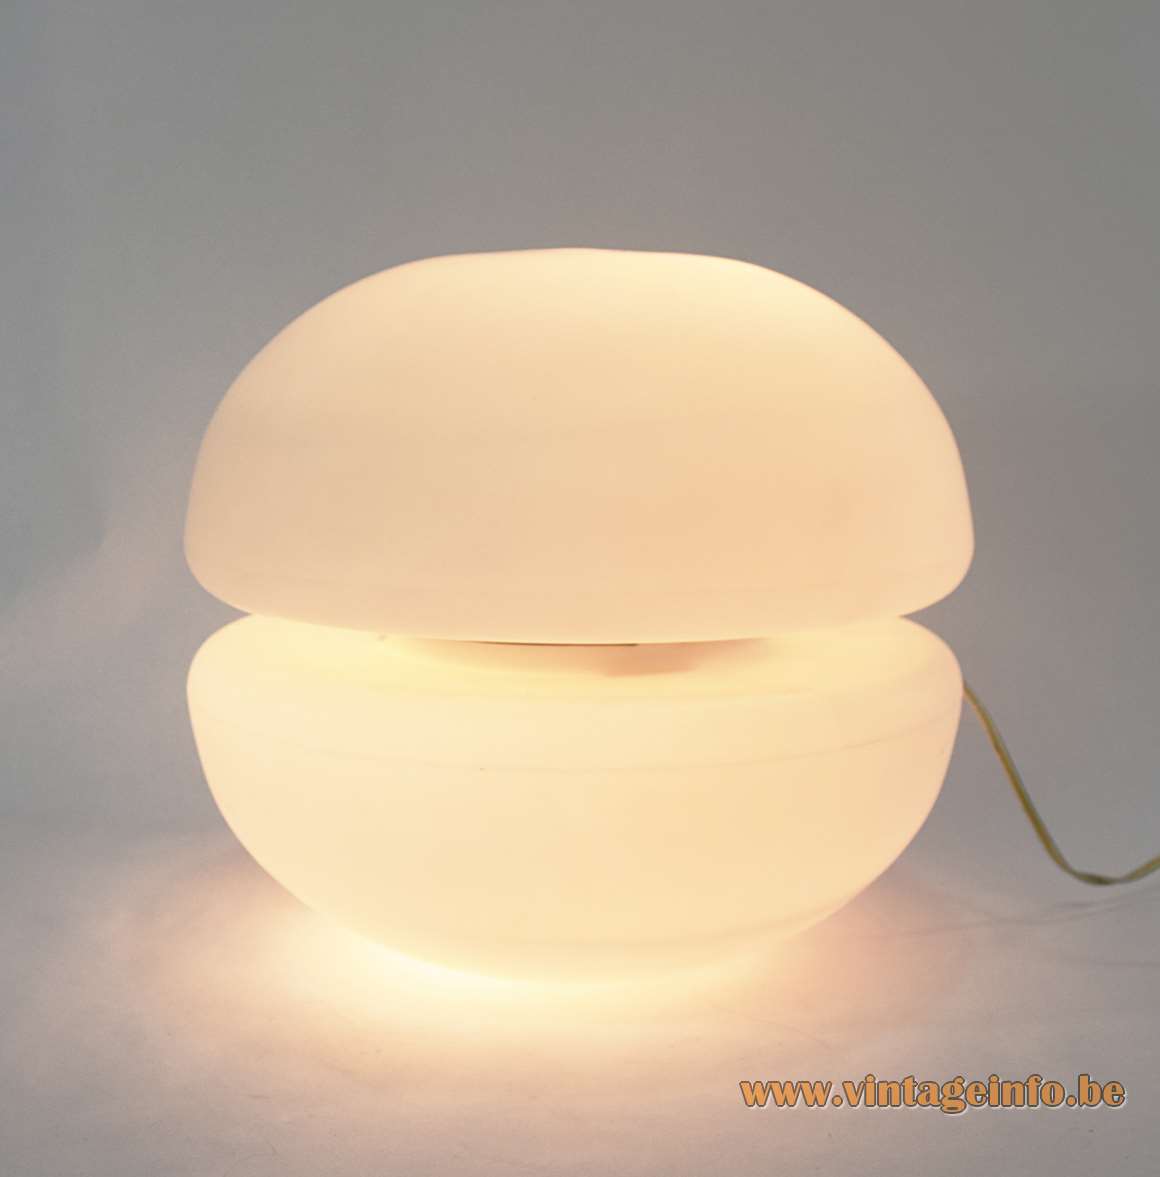 Reggiani floor or table lamp 2 frosted half round white opal glass lampshades hamburger 1950s 1960s